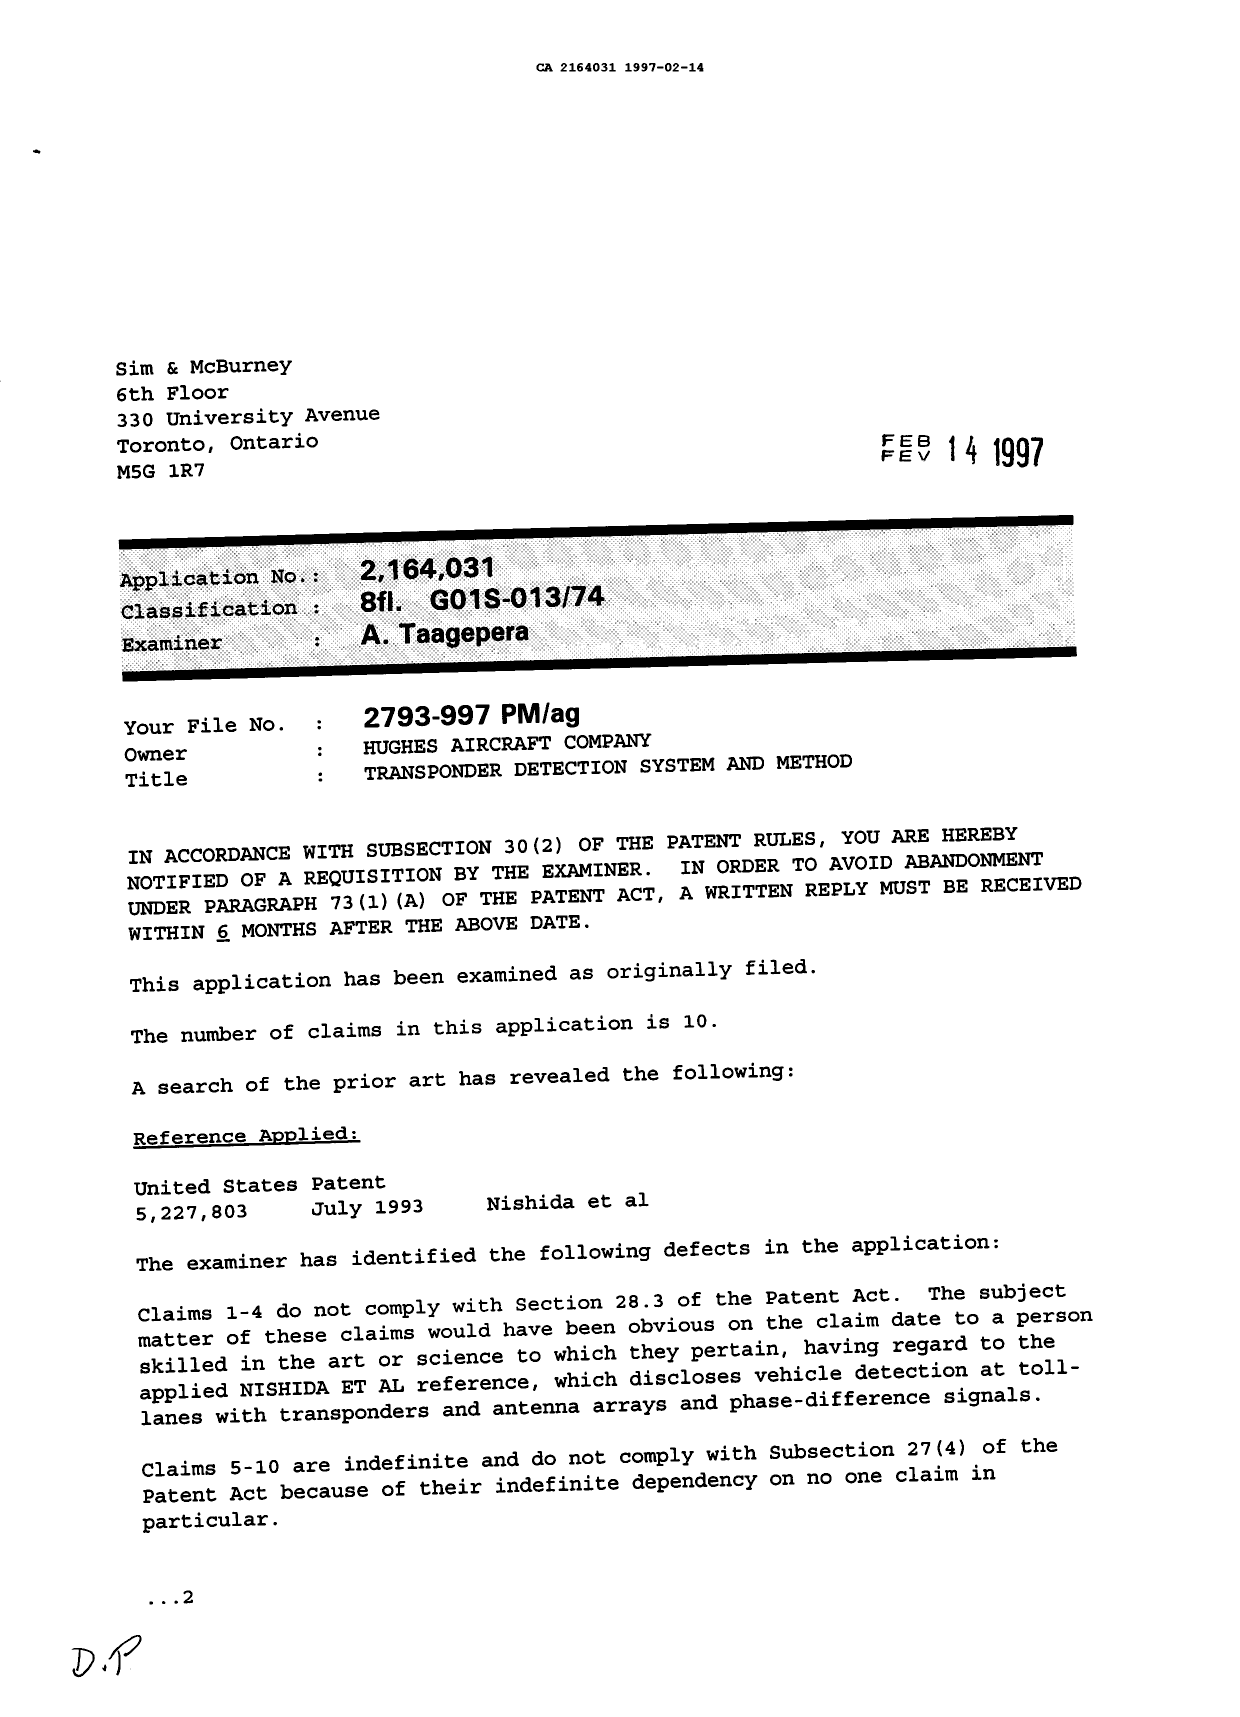 Canadian Patent Document 2164031. Examiner Requisition 19970214. Image 1 of 2